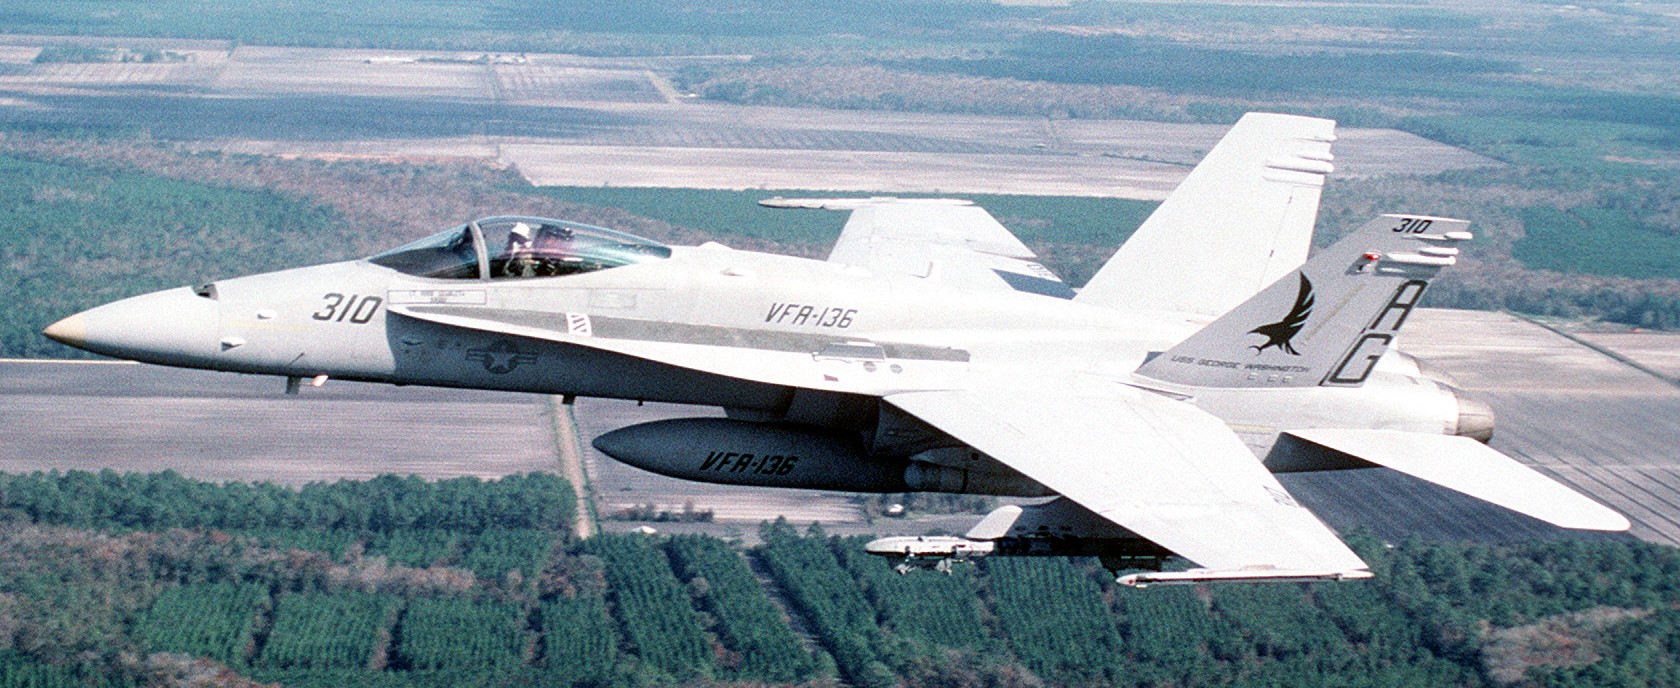 vfa-136 knighthawks strike fighter squadron f/a-18c hornet 1992 106 cvw-7 carrier air wing